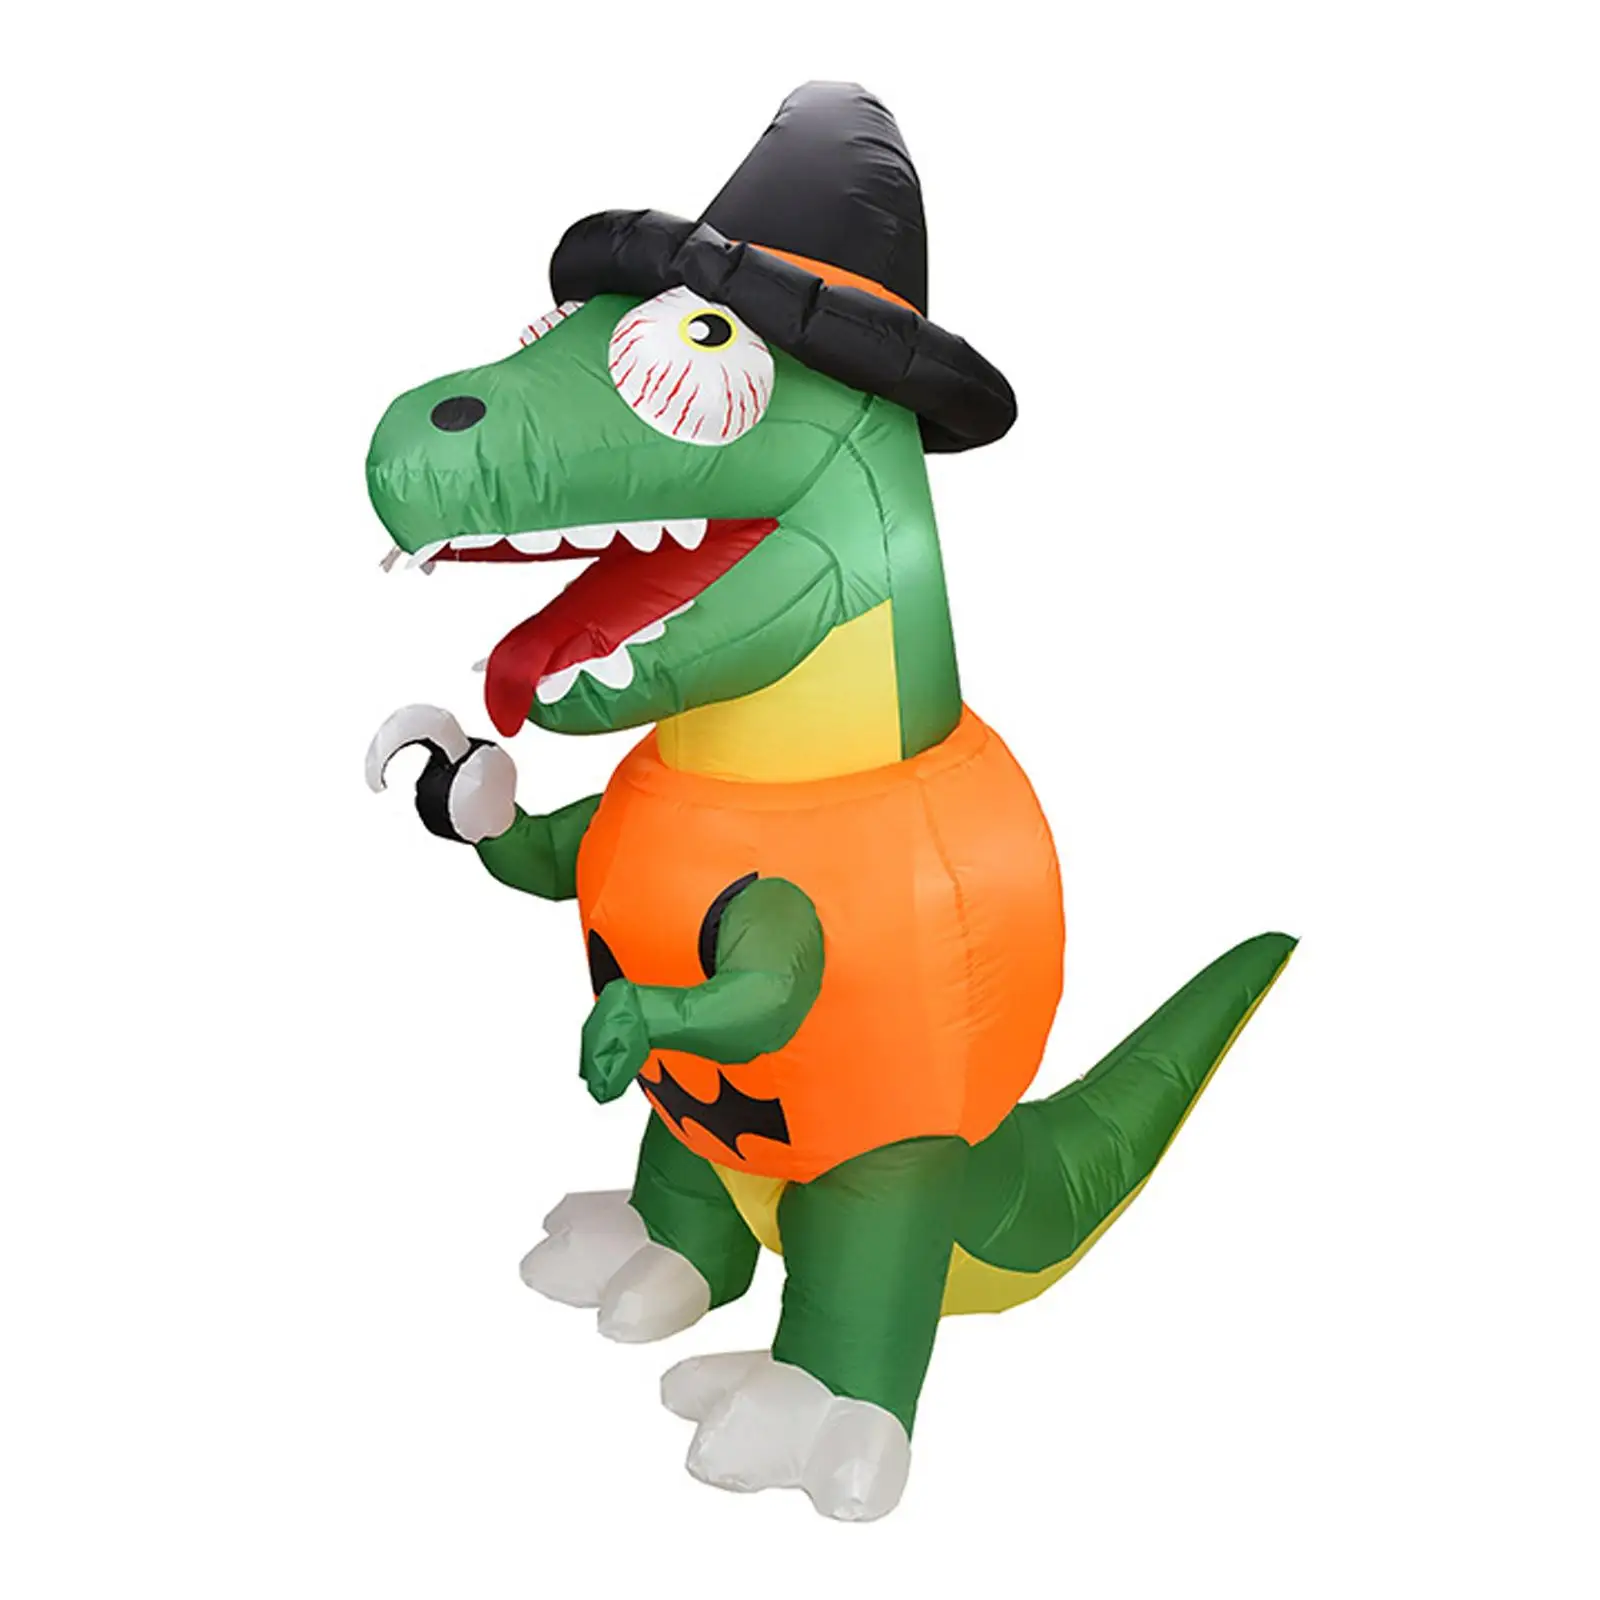 5.9 ft Tall Halloween Inflatable Pumpkin Dinosaur Lighted Inflatable for Outdoor Lawn